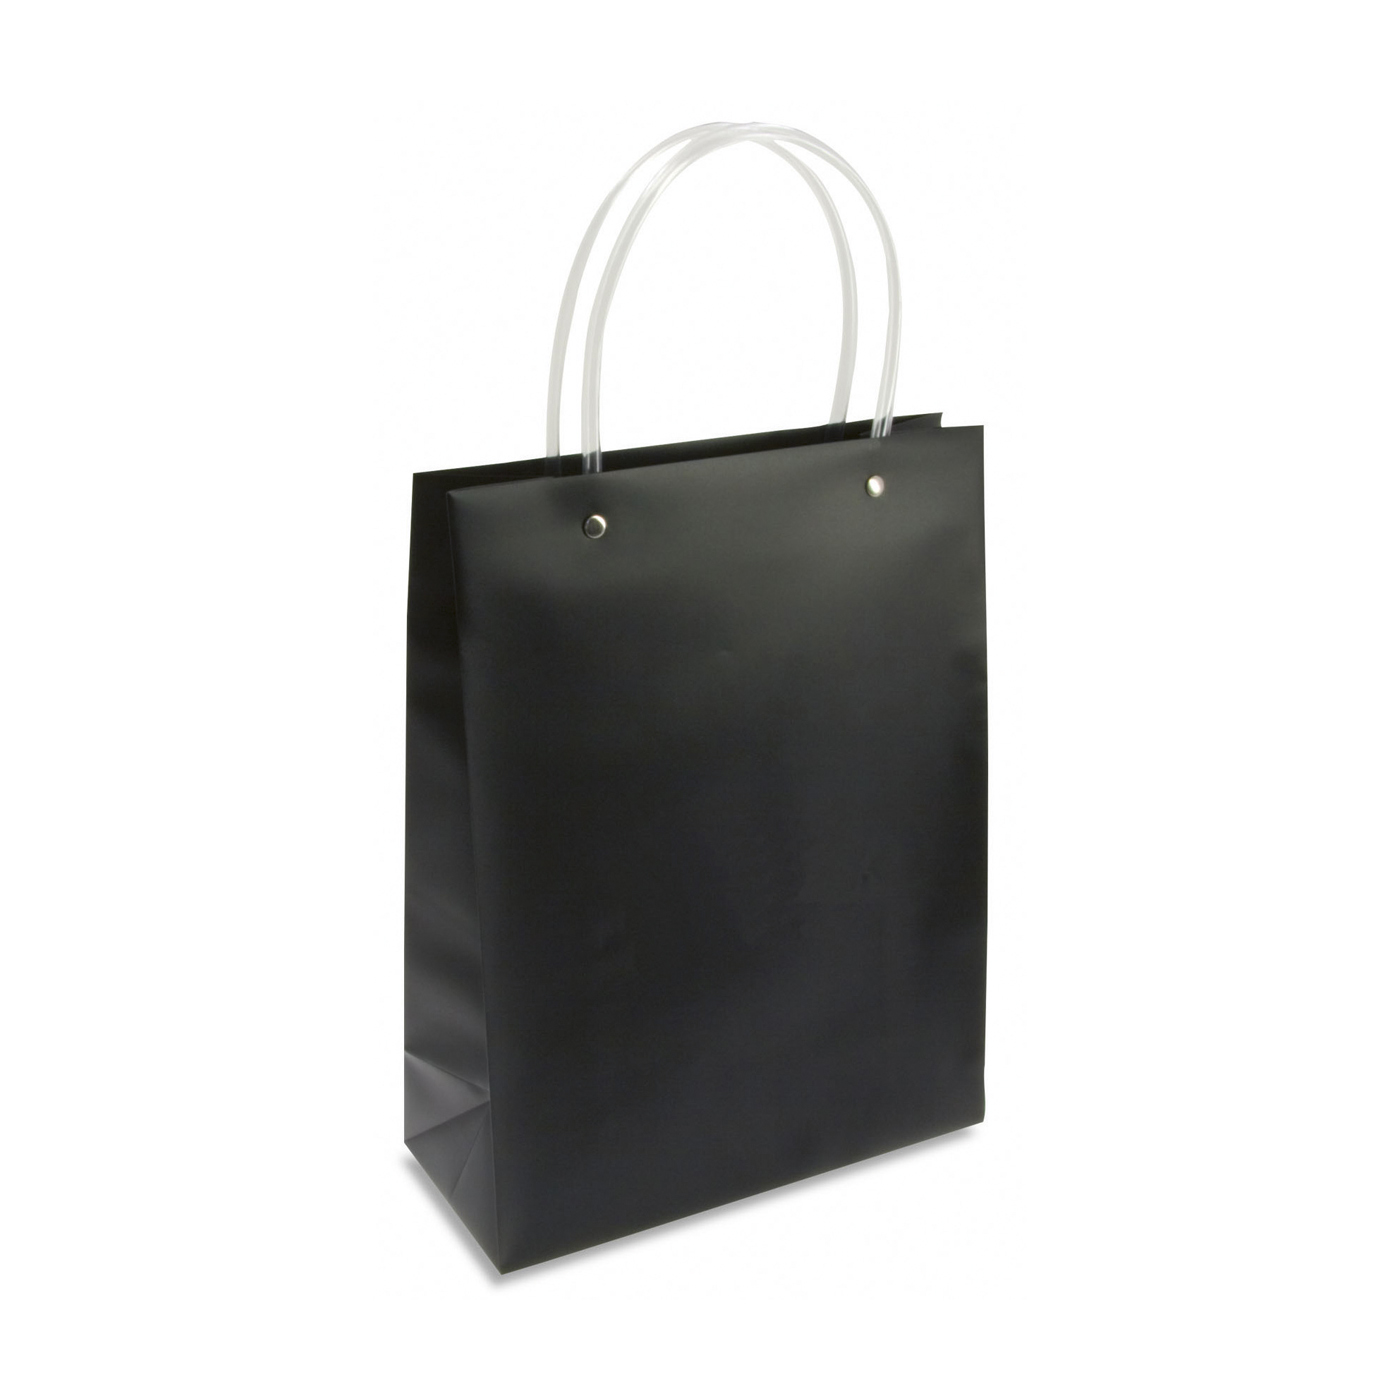 Carrying Bags, Black, 230 x 100 x 300 mm - 10 pieces